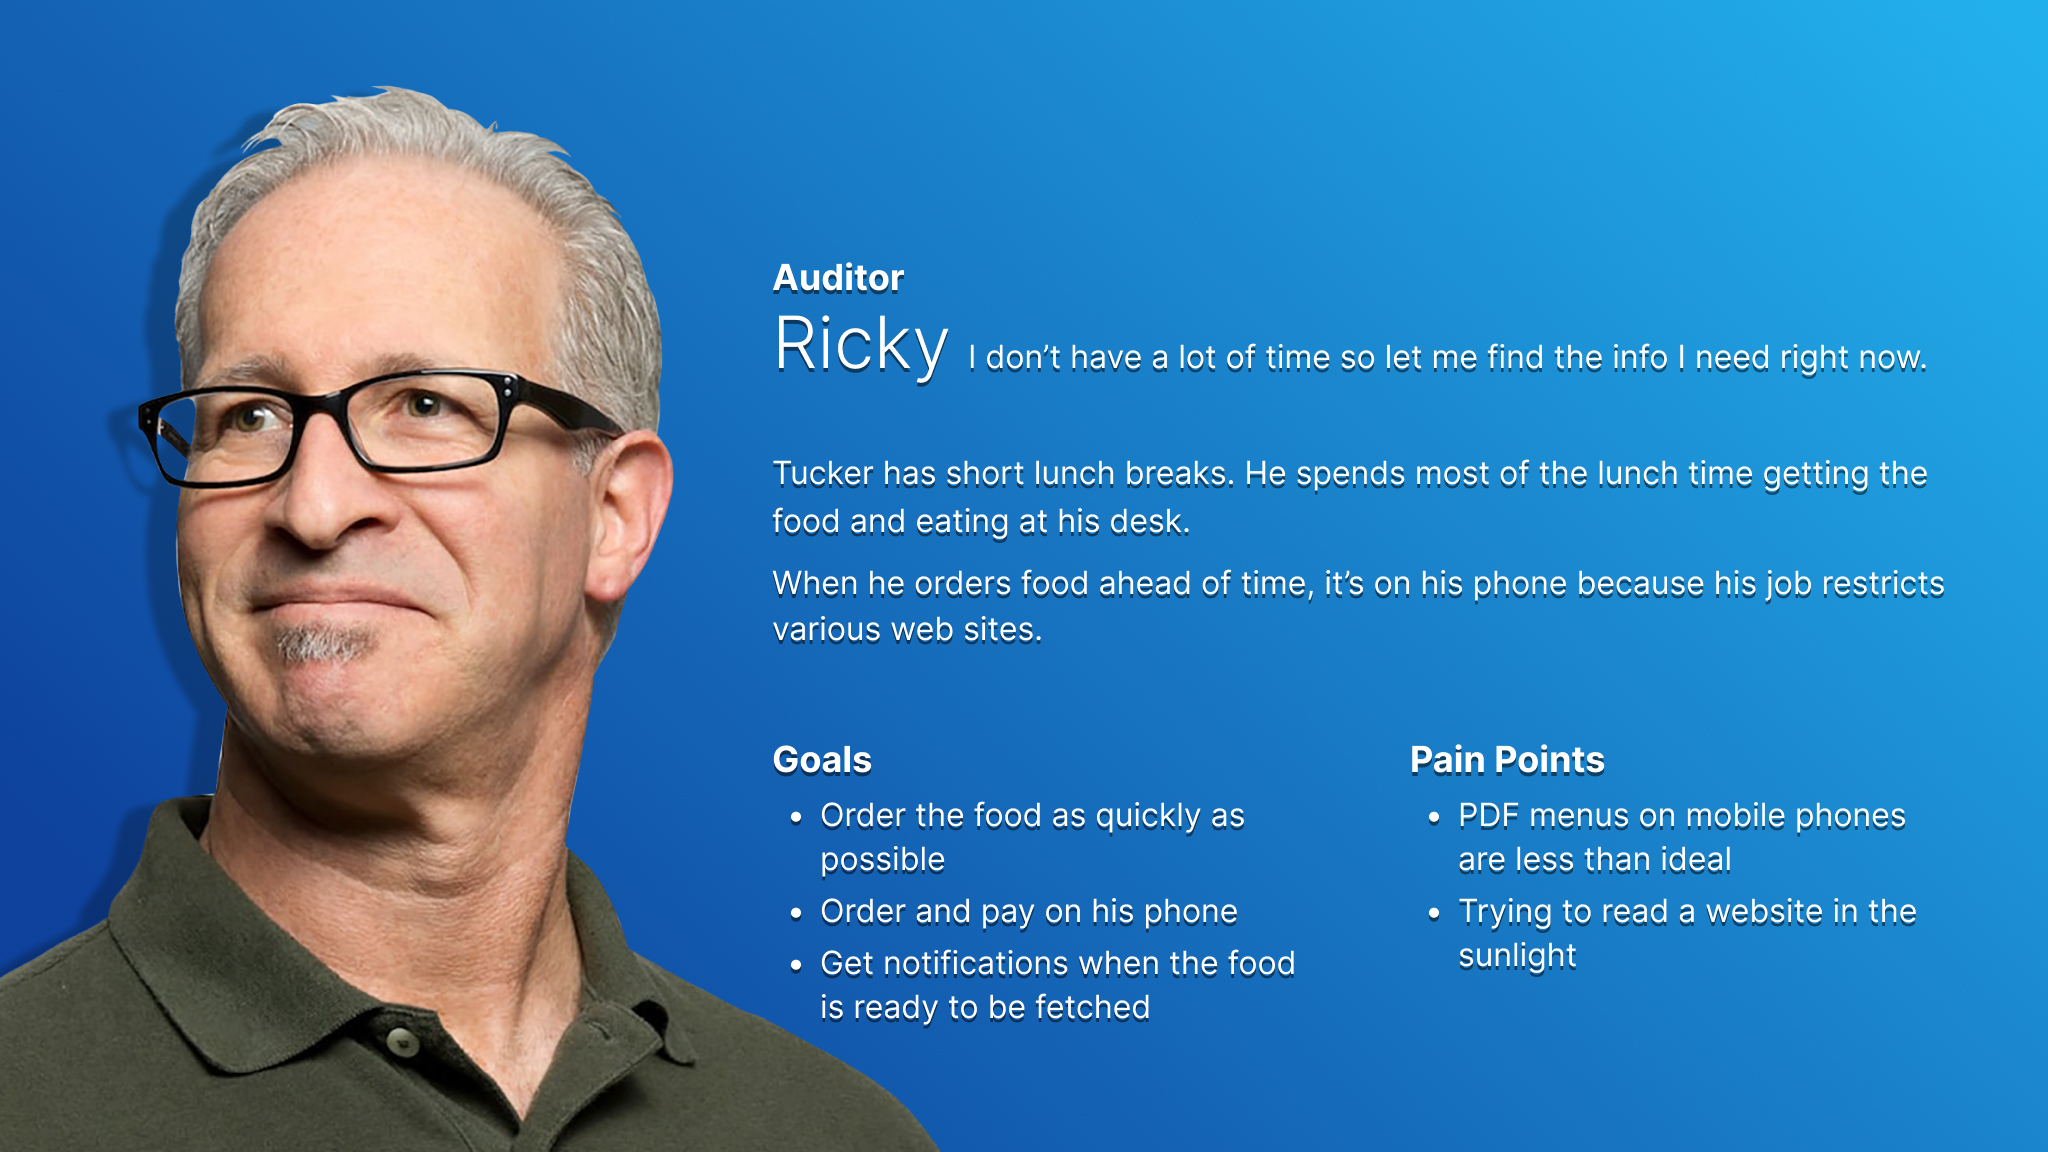 Persona card for Ricky, who represents older food truck site users and users who are pressed for time.